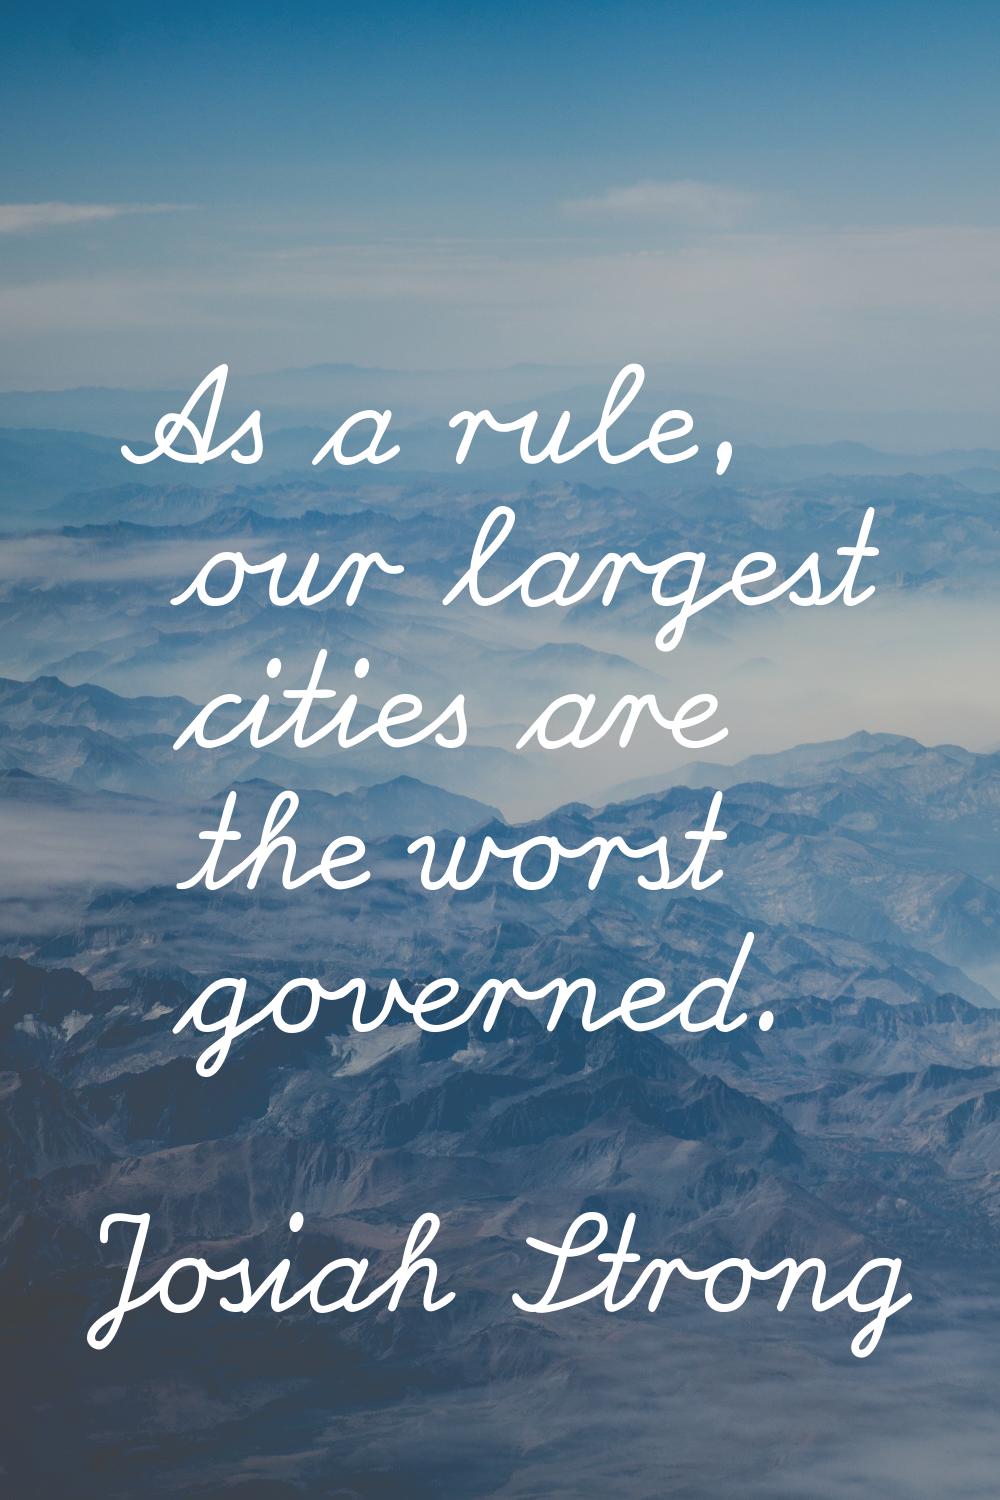 As a rule, our largest cities are the worst governed.